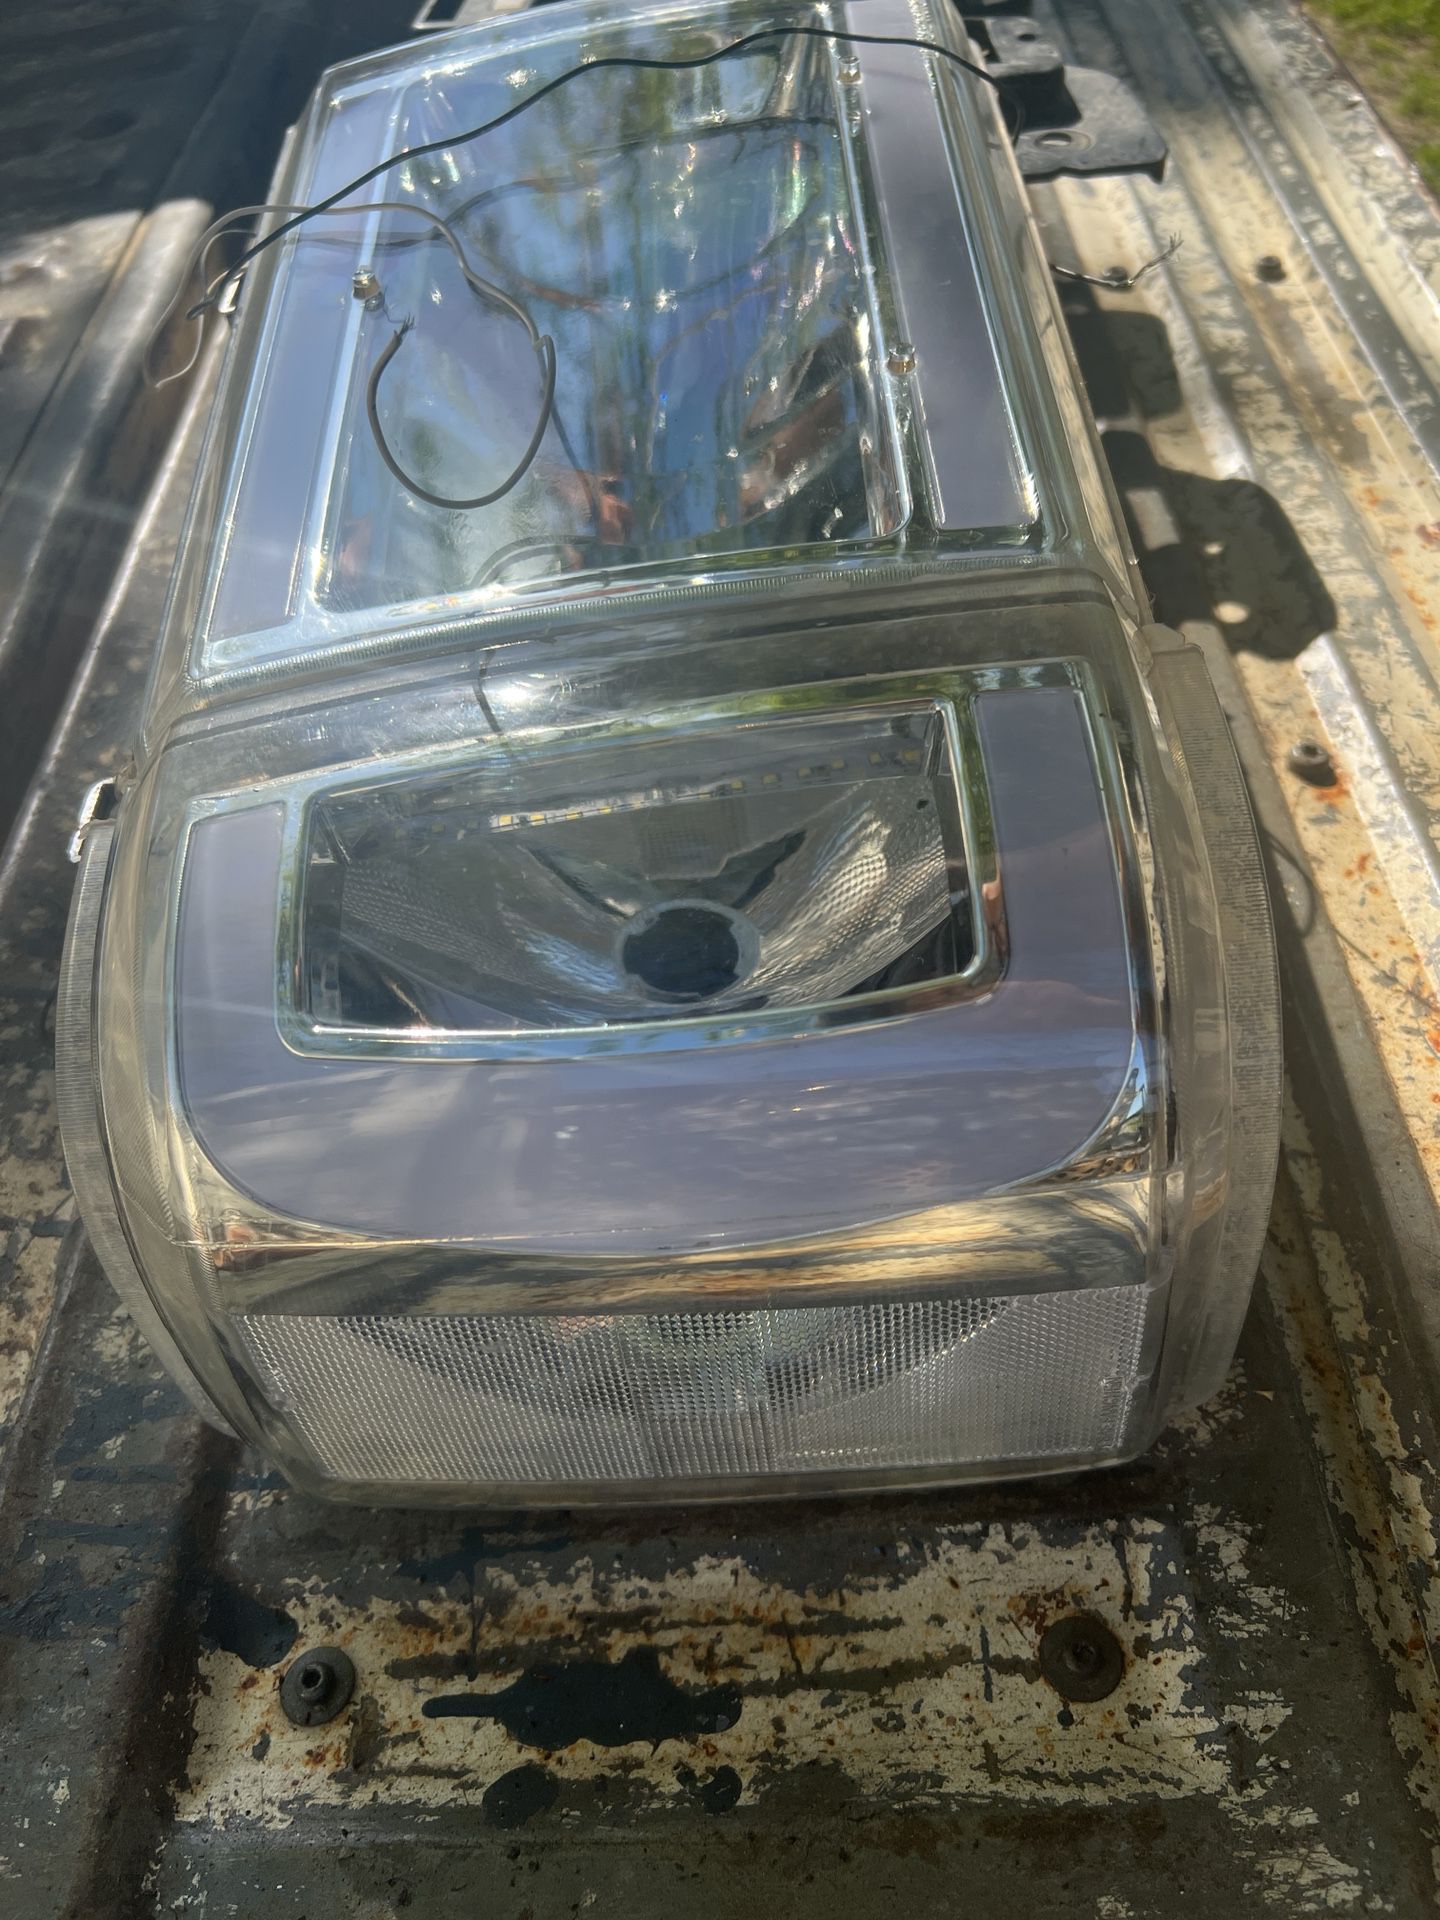 LED Headlights For a 1(contact info removed) 